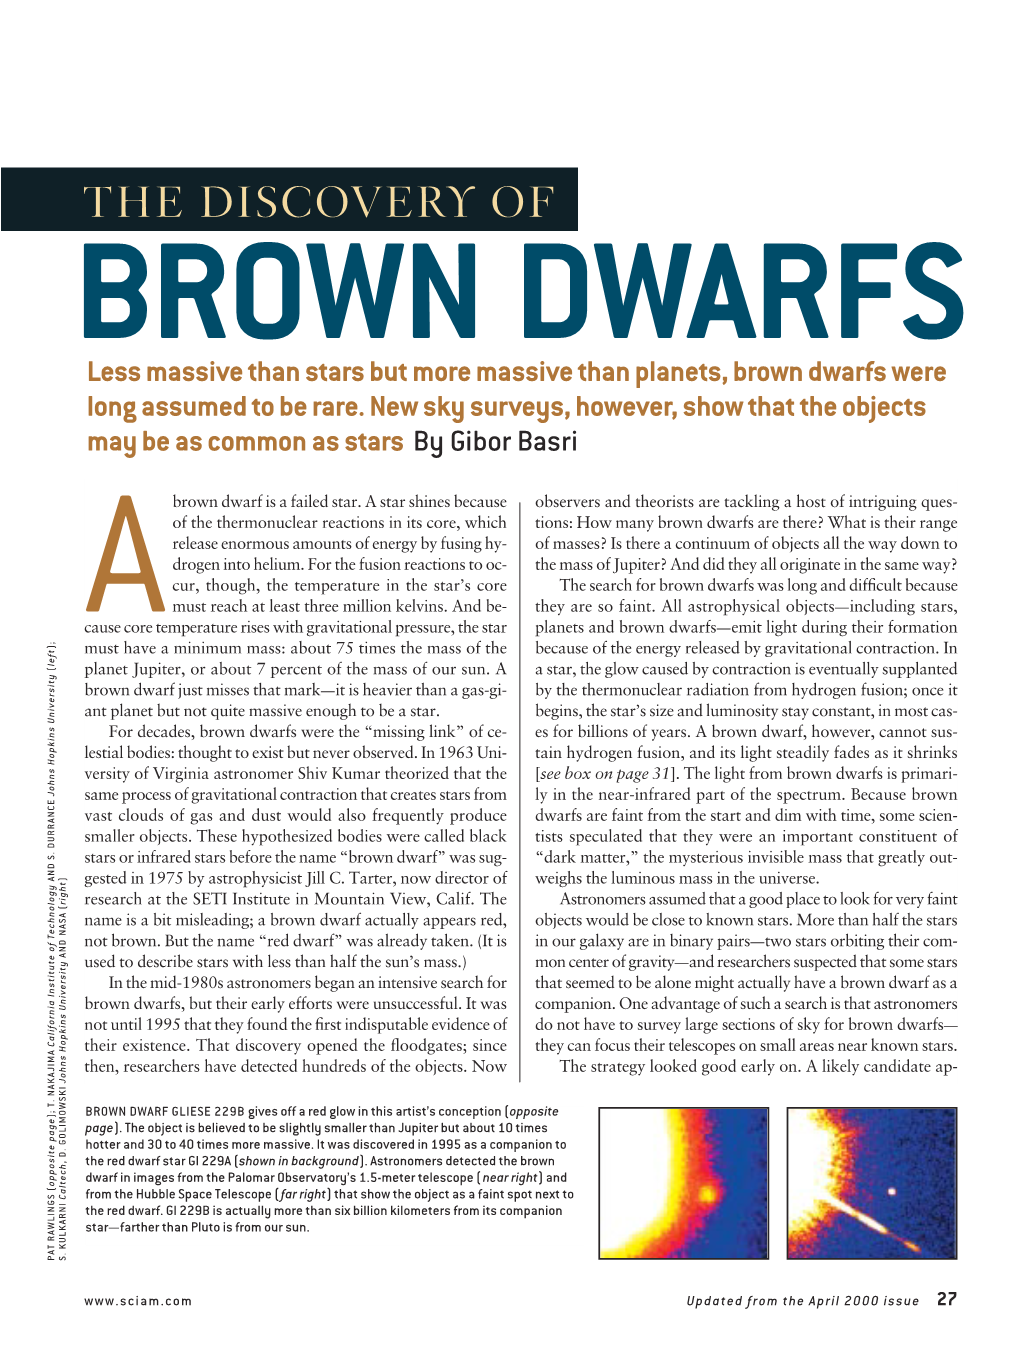 BROWN DWARFS Less Massive Than Stars but More Massive Than Planets, Brown Dwarfs Were Long Assumed to Be Rare